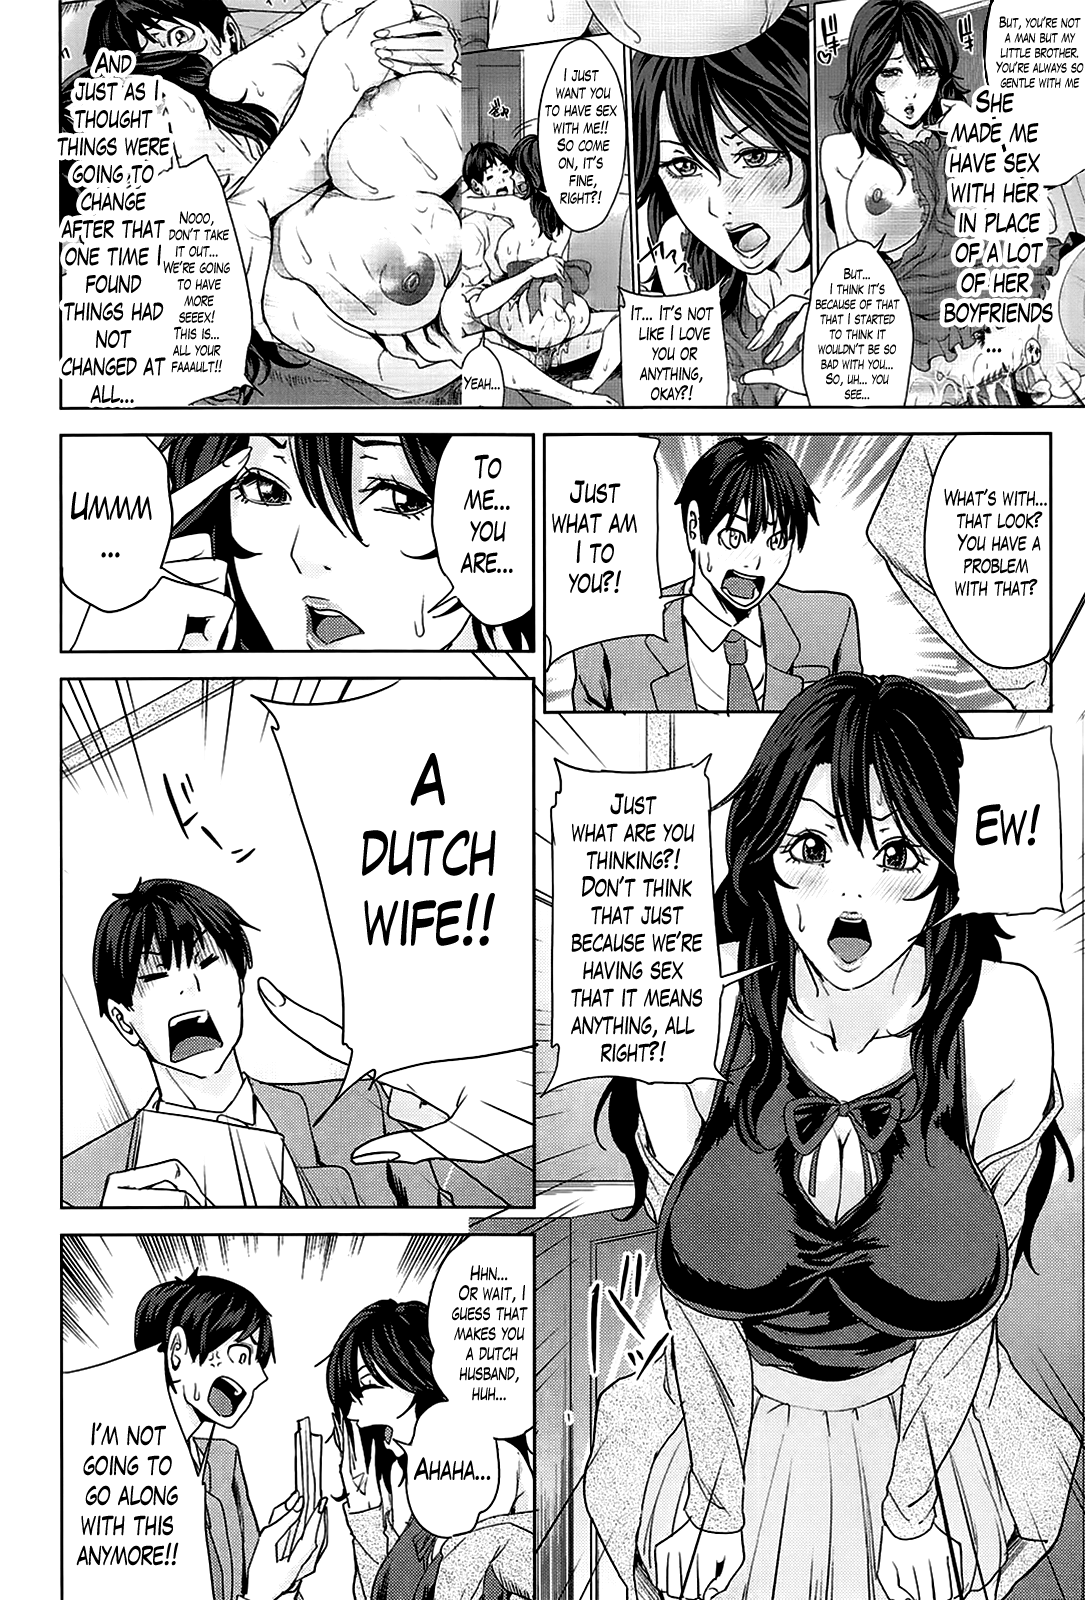 National Married Academy Vol.1 Chapter 7: Her Little Brother Is Her Imaginary/ideal Boyfriend 2 - Picture 2